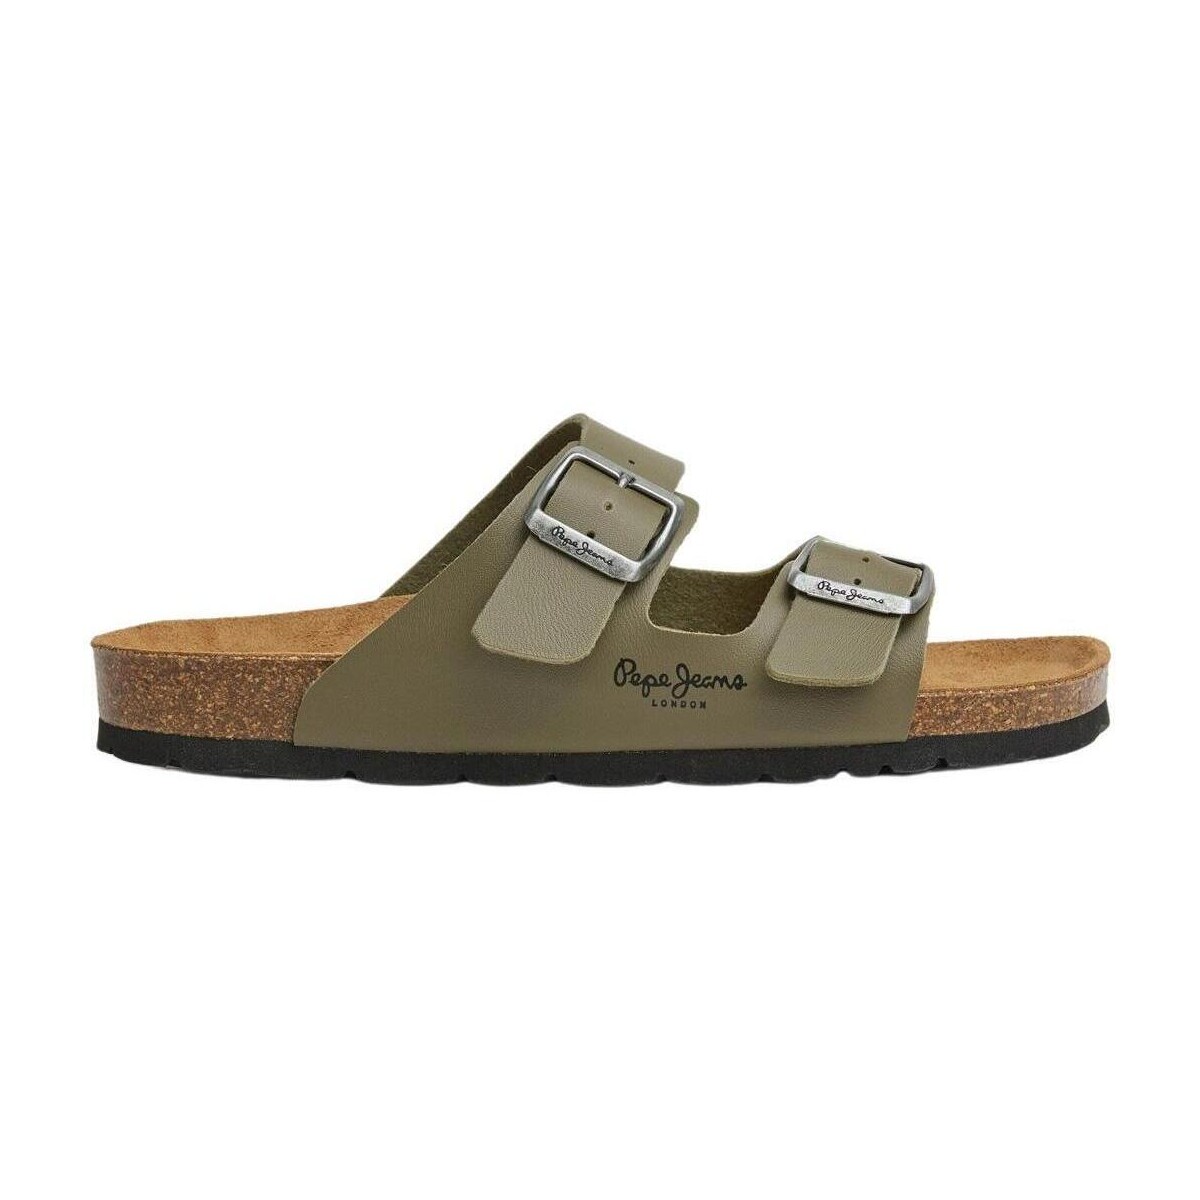 Zapatos Mujer Sandalias Pepe jeans OBAN CLASSIC Verde